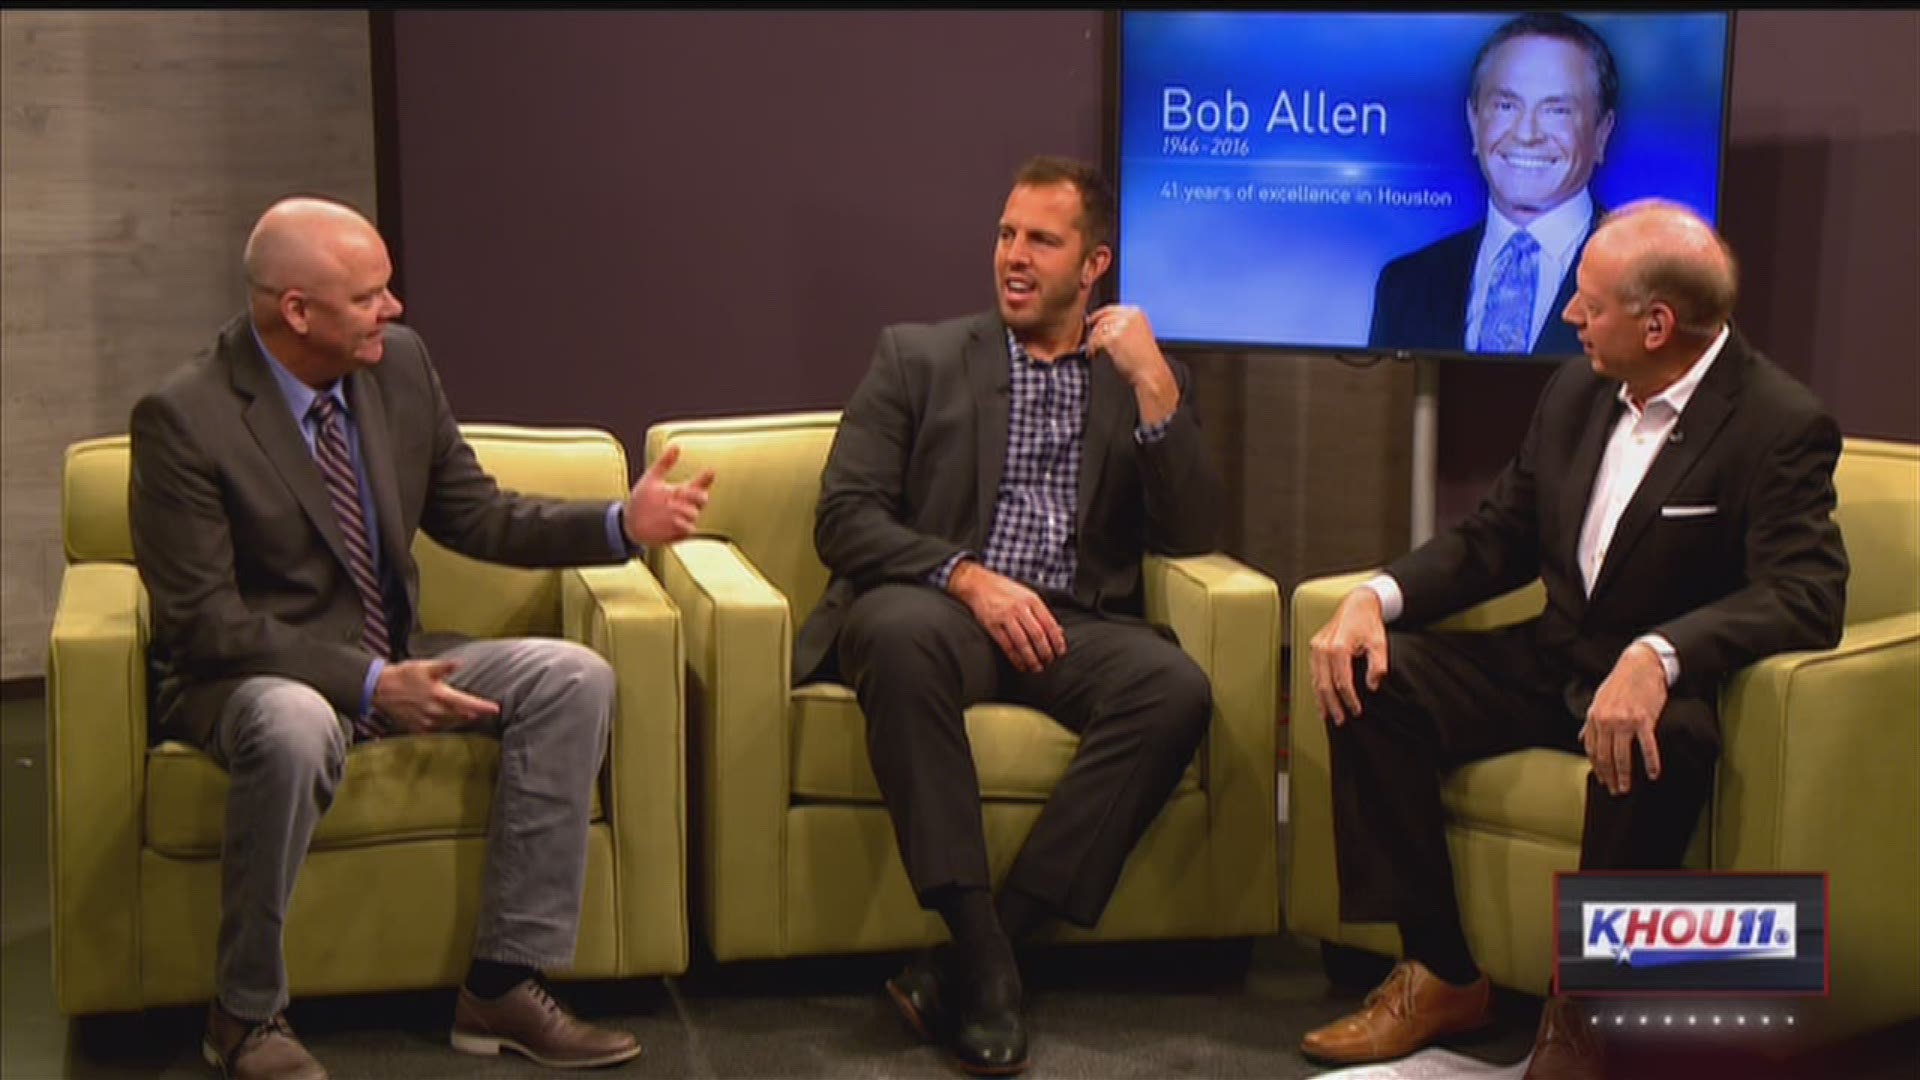 Former colleagues Jeff McShan and Seth Payne share their memories of working with Bob Allen.